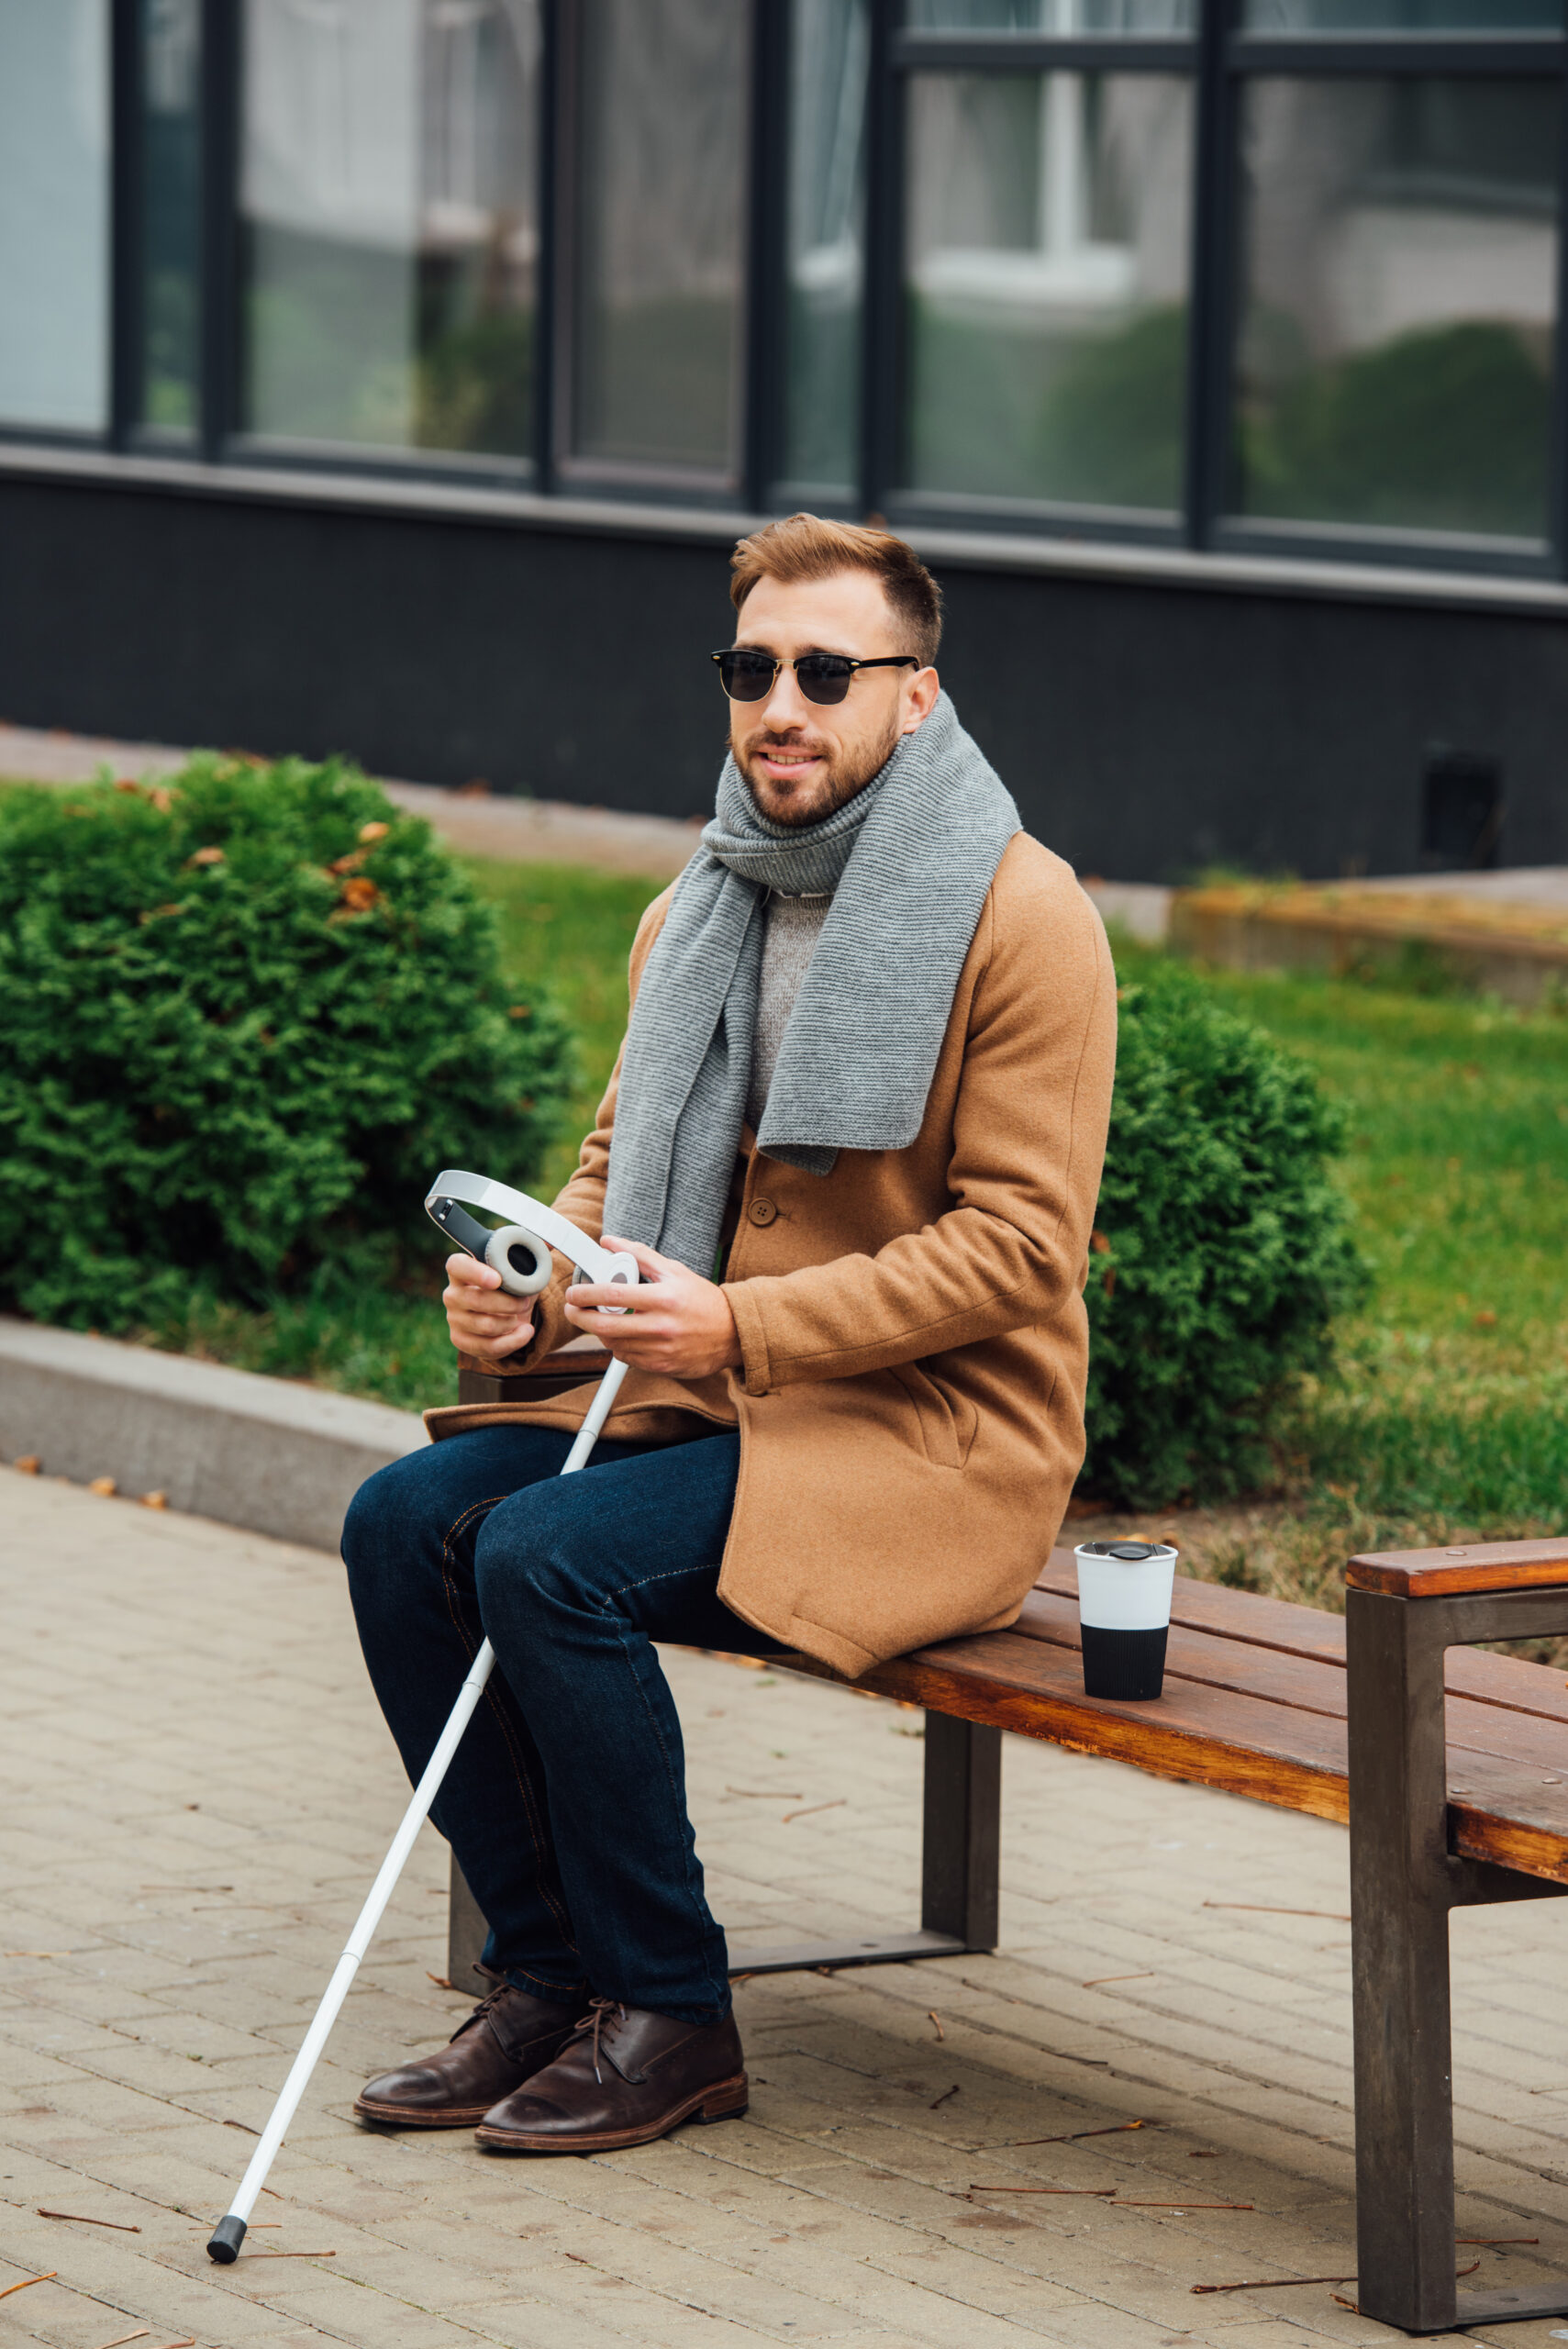 Blind man holding headphones while sitting on bench